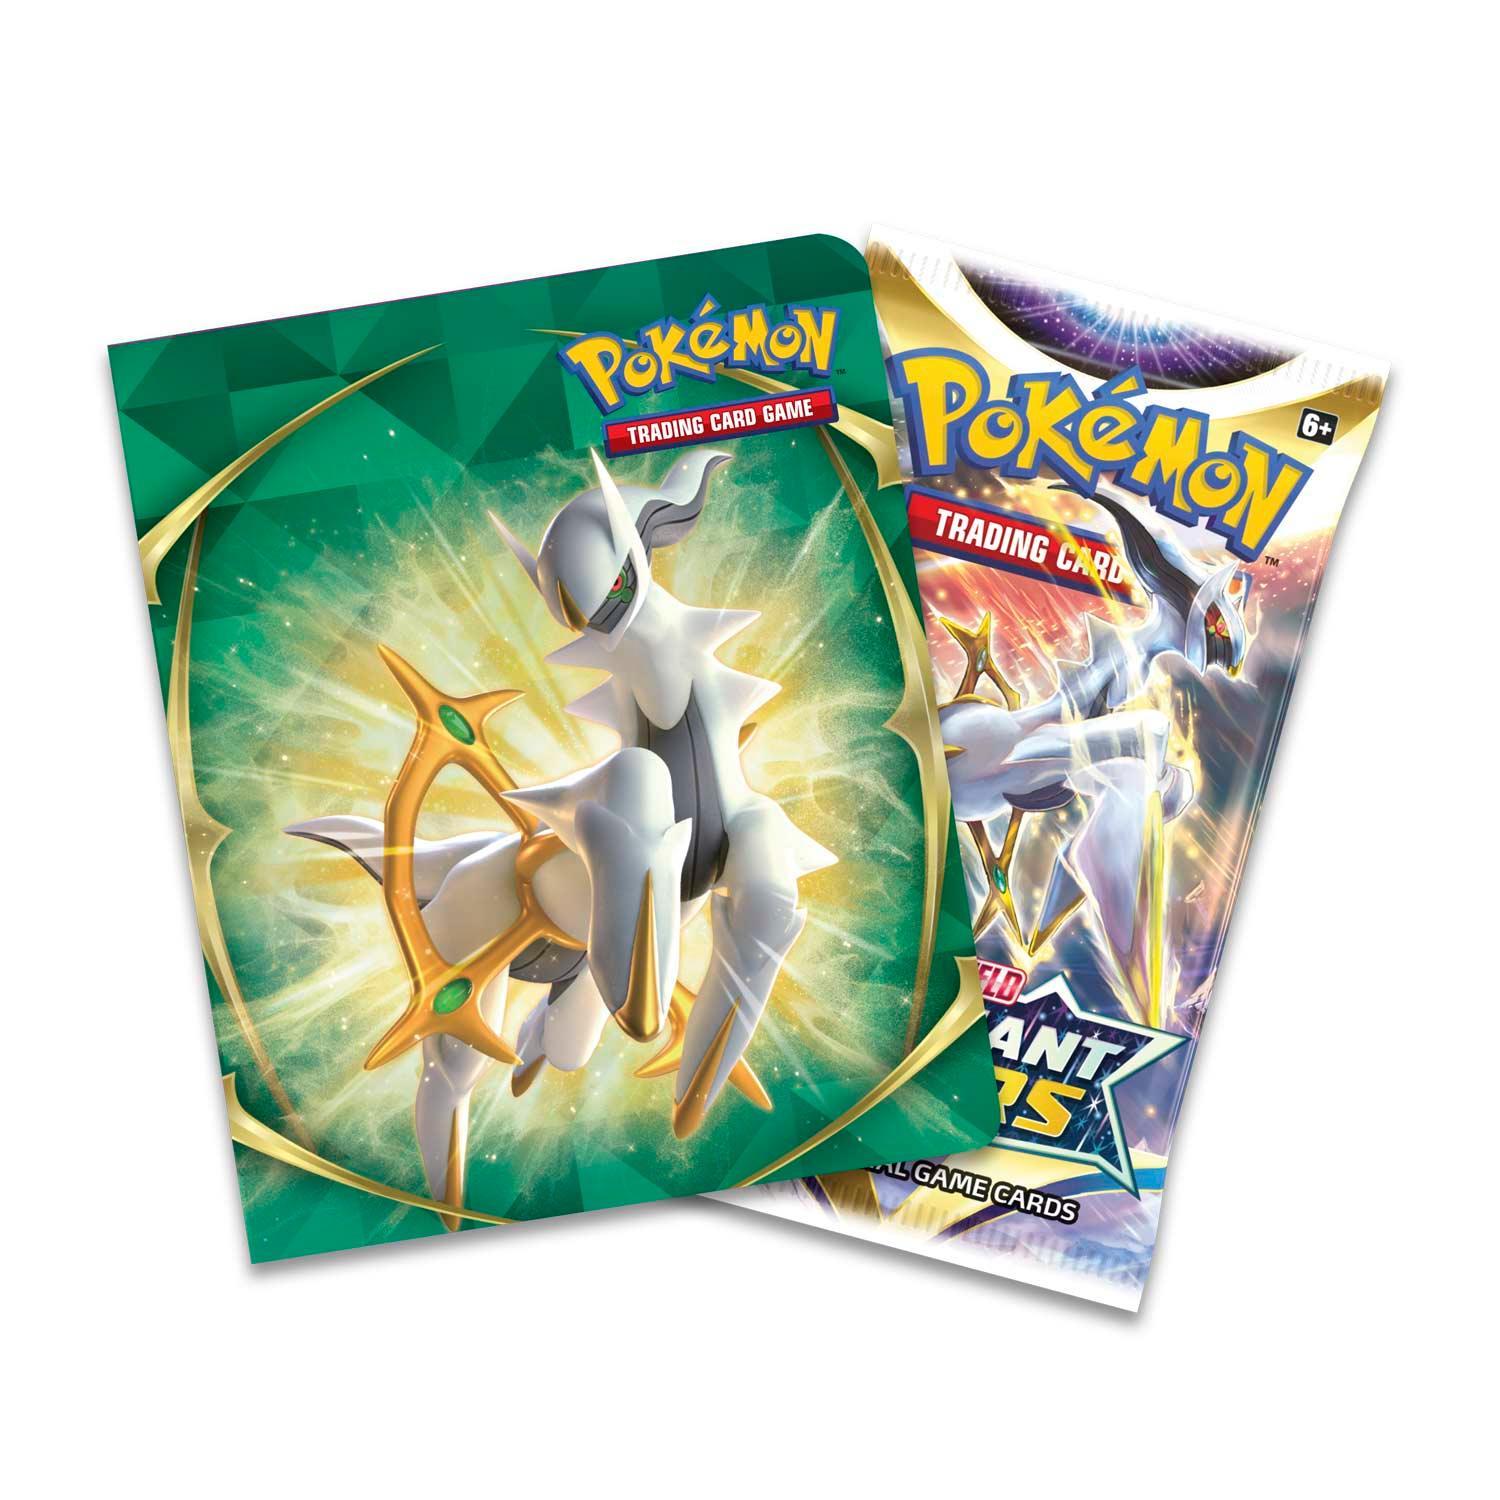 Pokemon Collector Chest (Lunch Box) - 2022 (Spring) - Arceus on Cover - Hobby Champion Inc